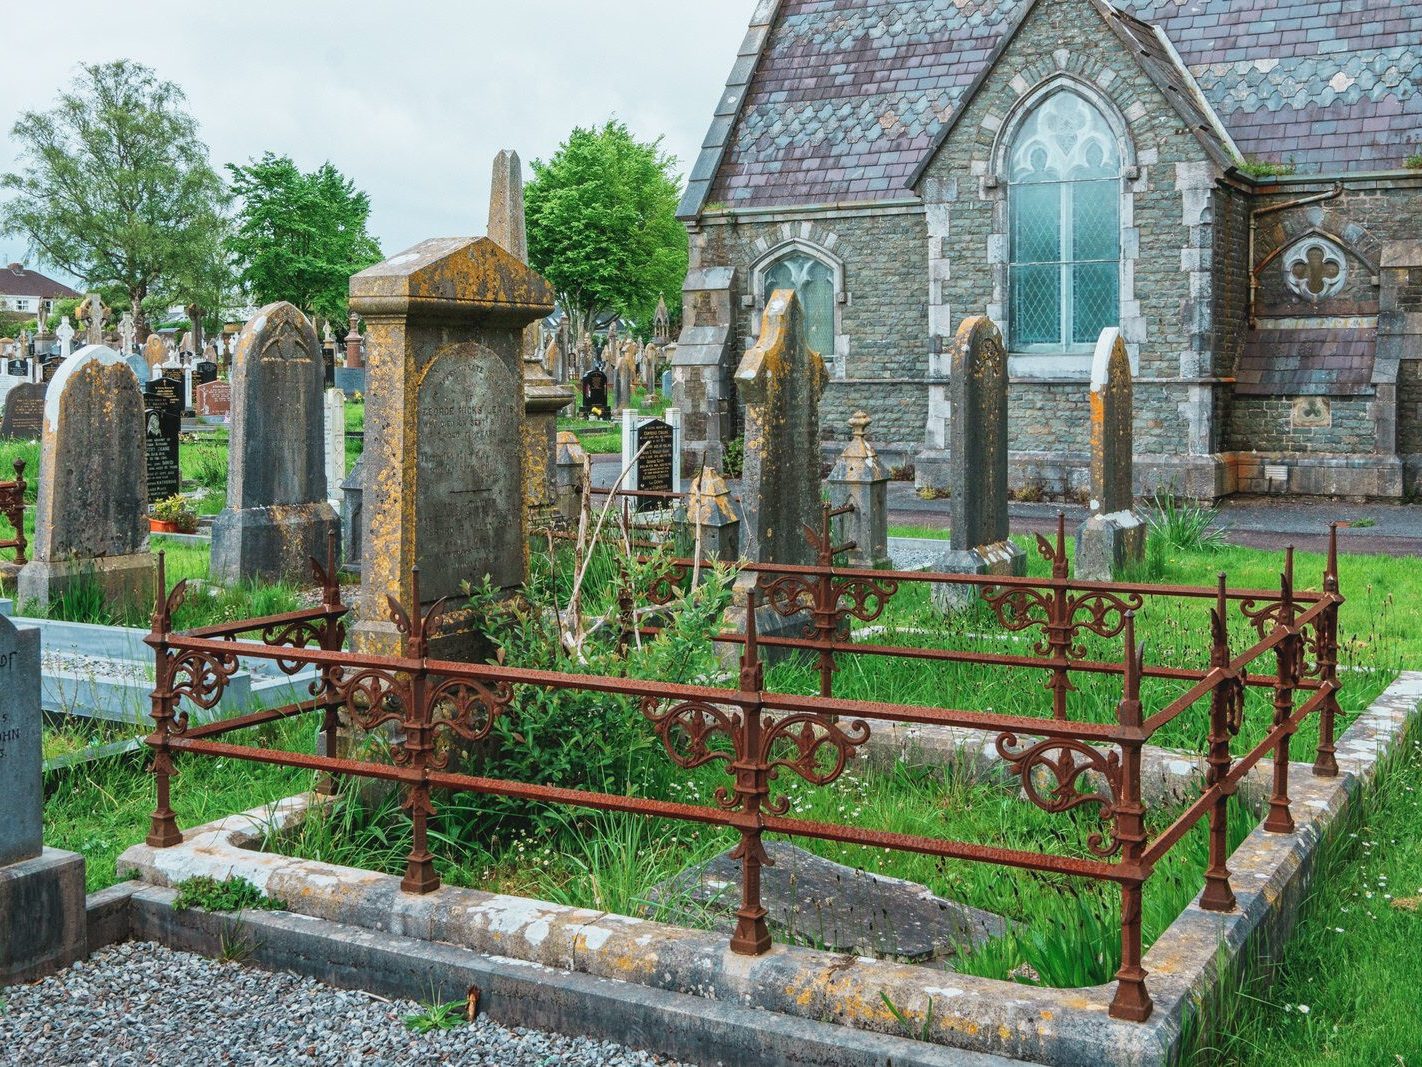 ST FINBARR'S CEMETERY IN CORK [THE MAIN STRUCTURES] 015